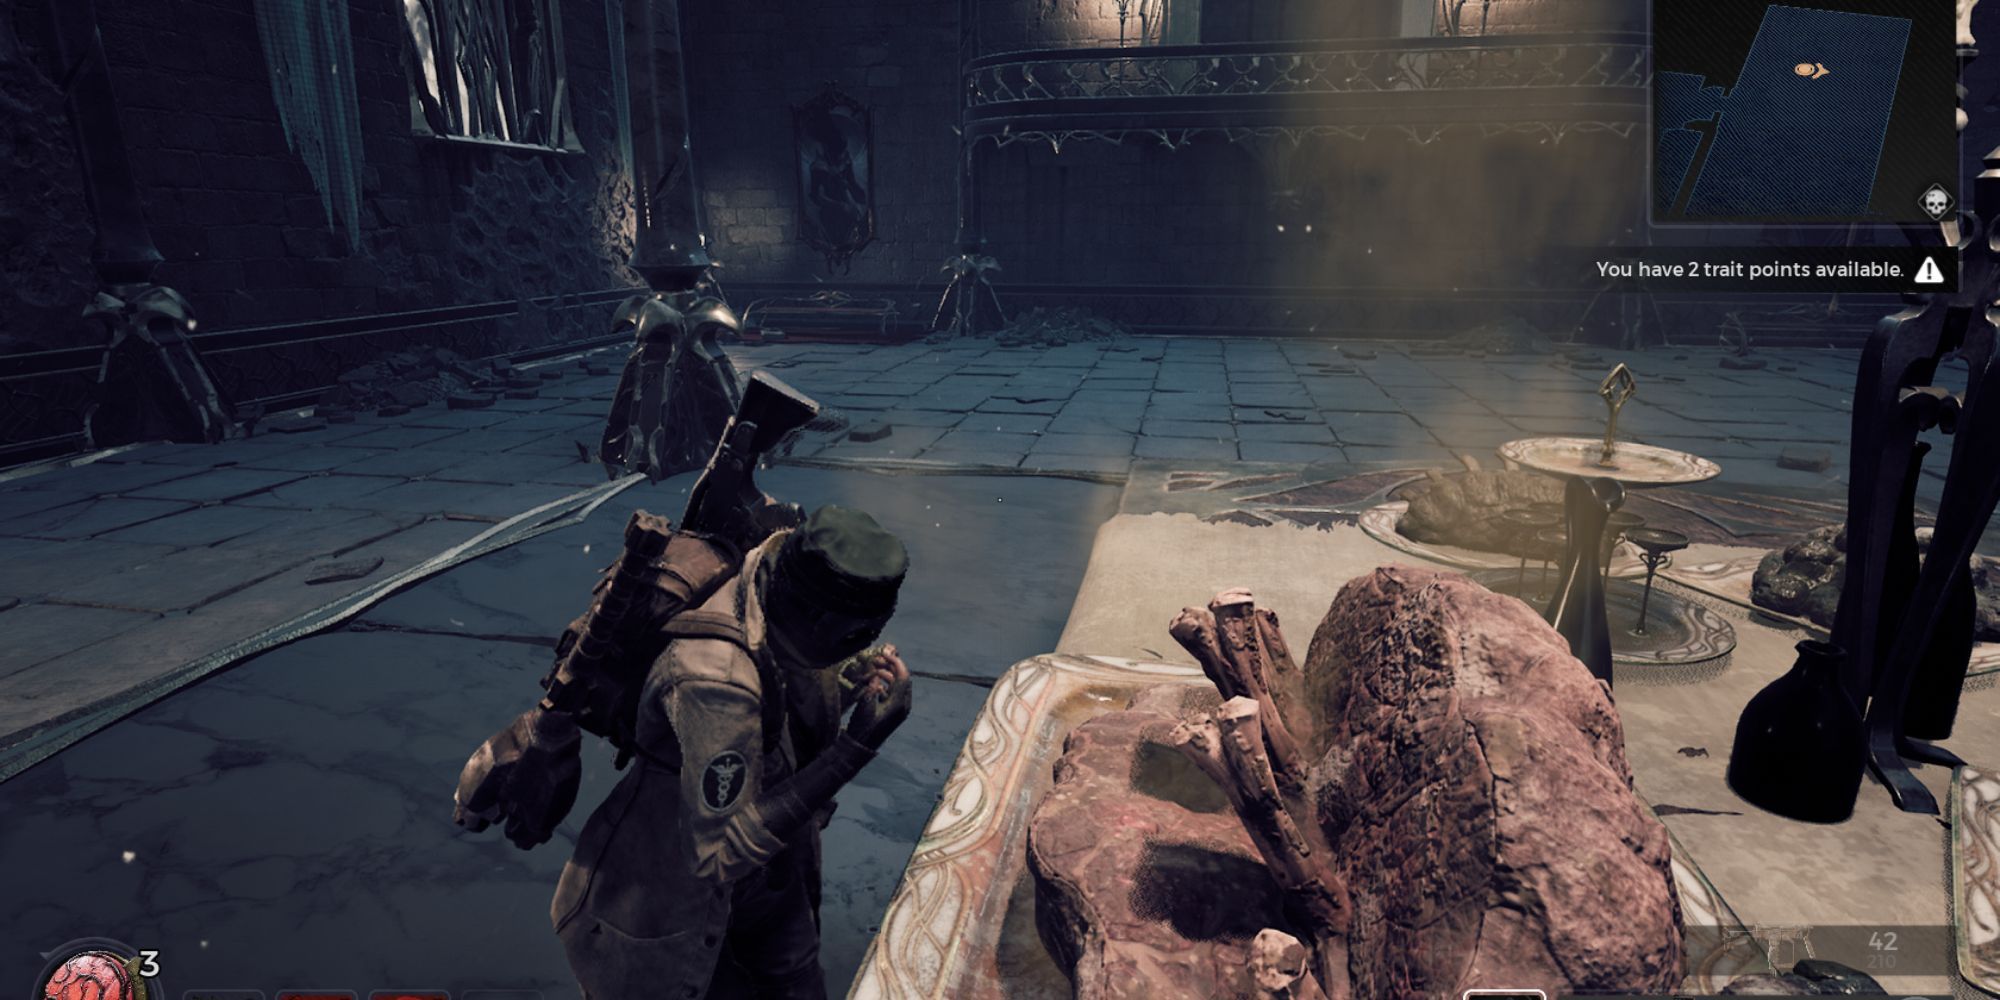 _the great hall feast event in remnant 2